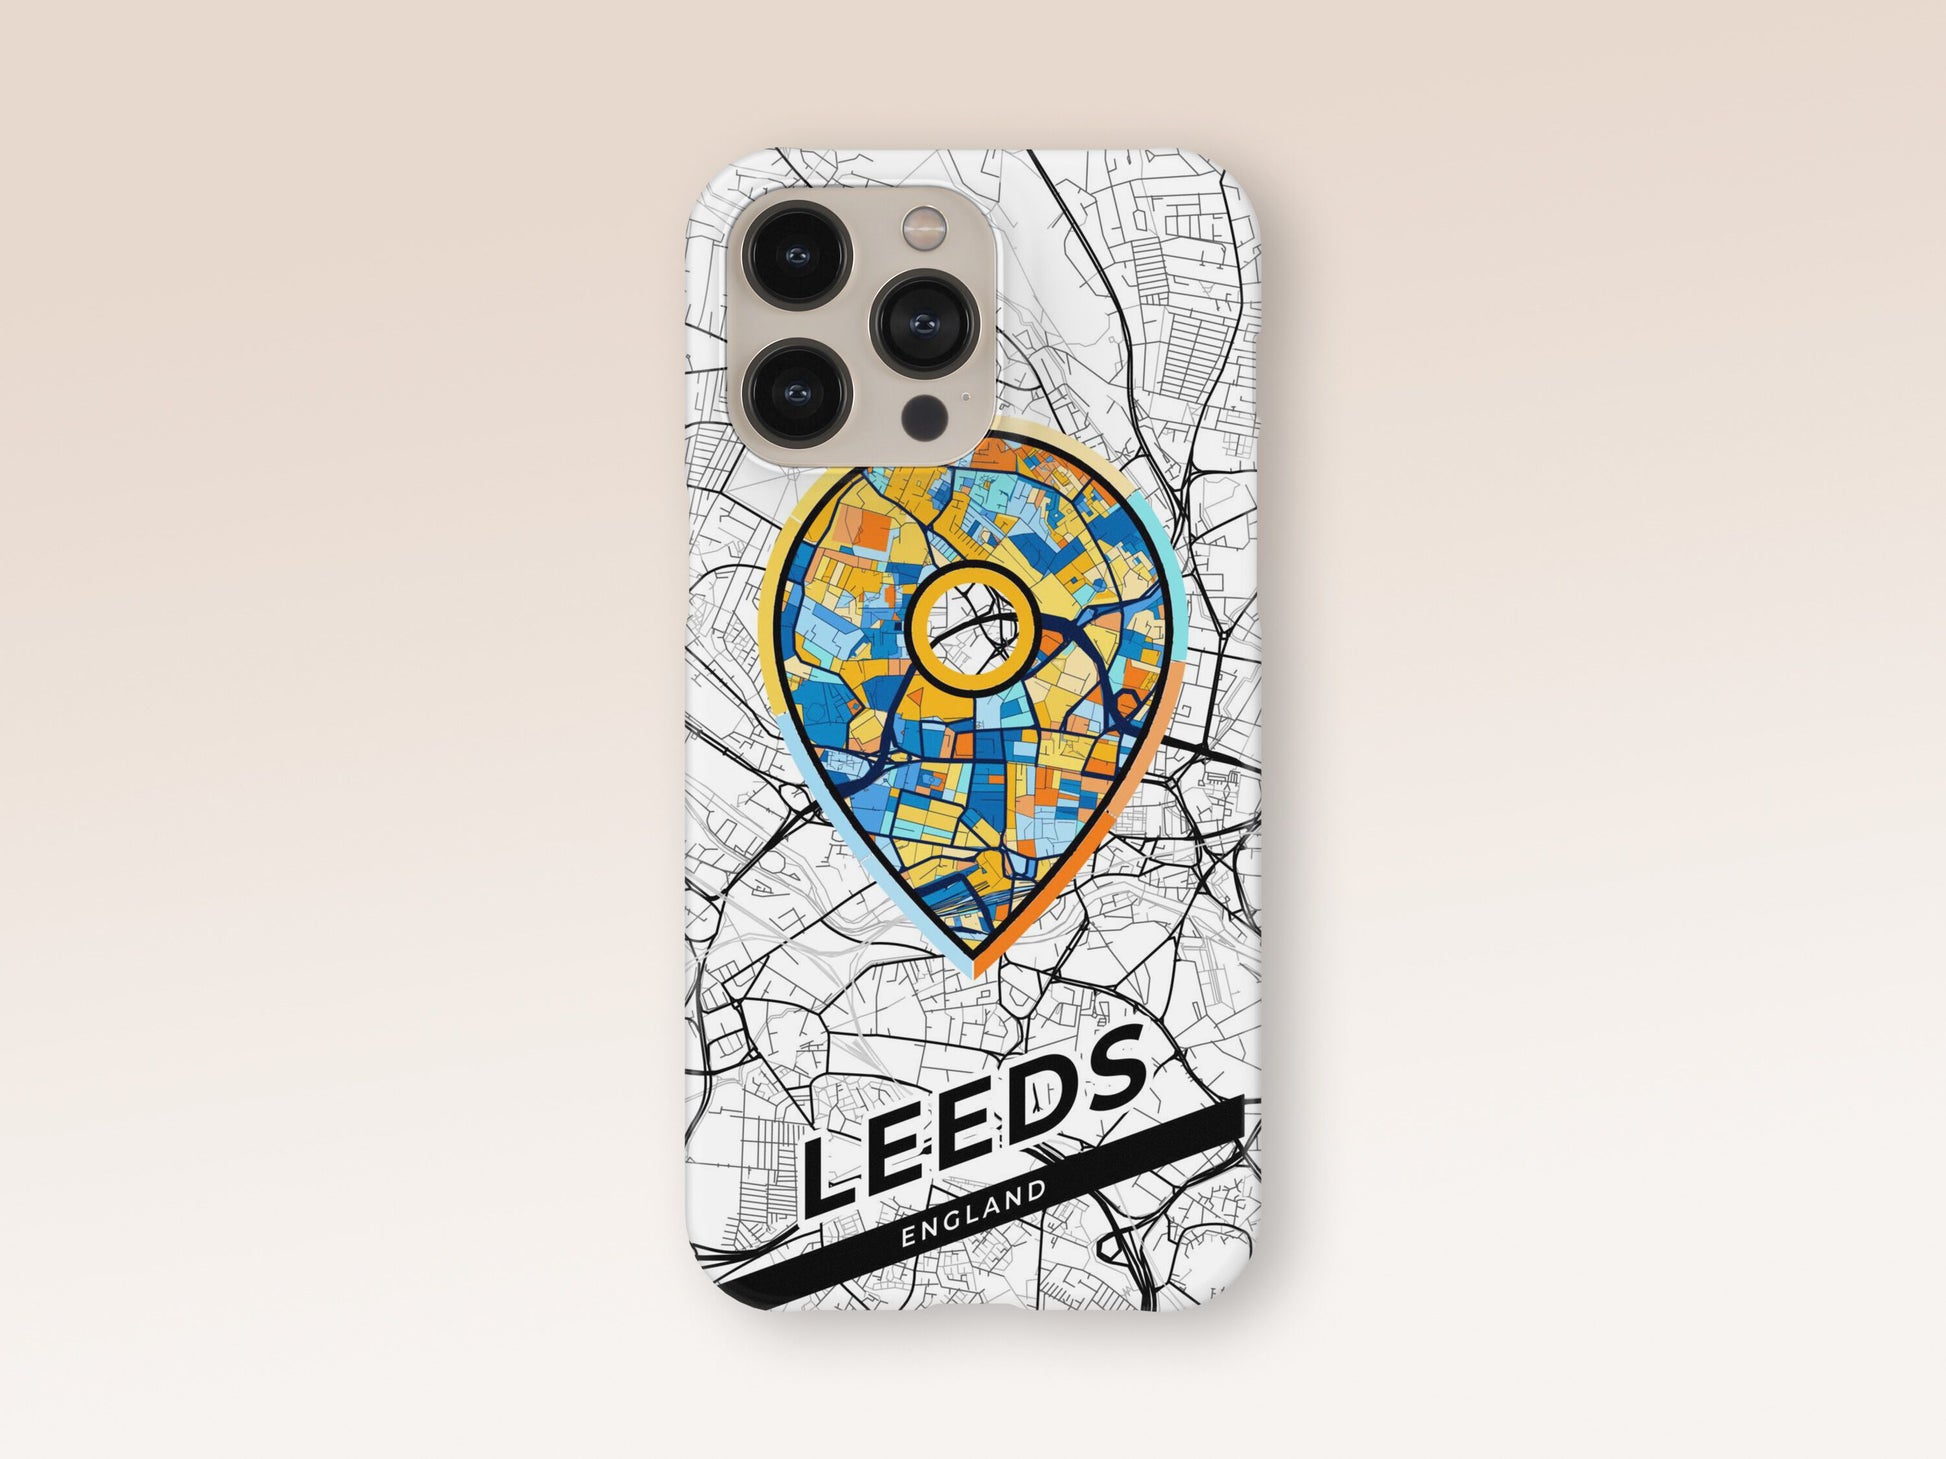 Leeds England slim phone case with colorful icon. Birthday, wedding or housewarming gift. Couple match cases. 1